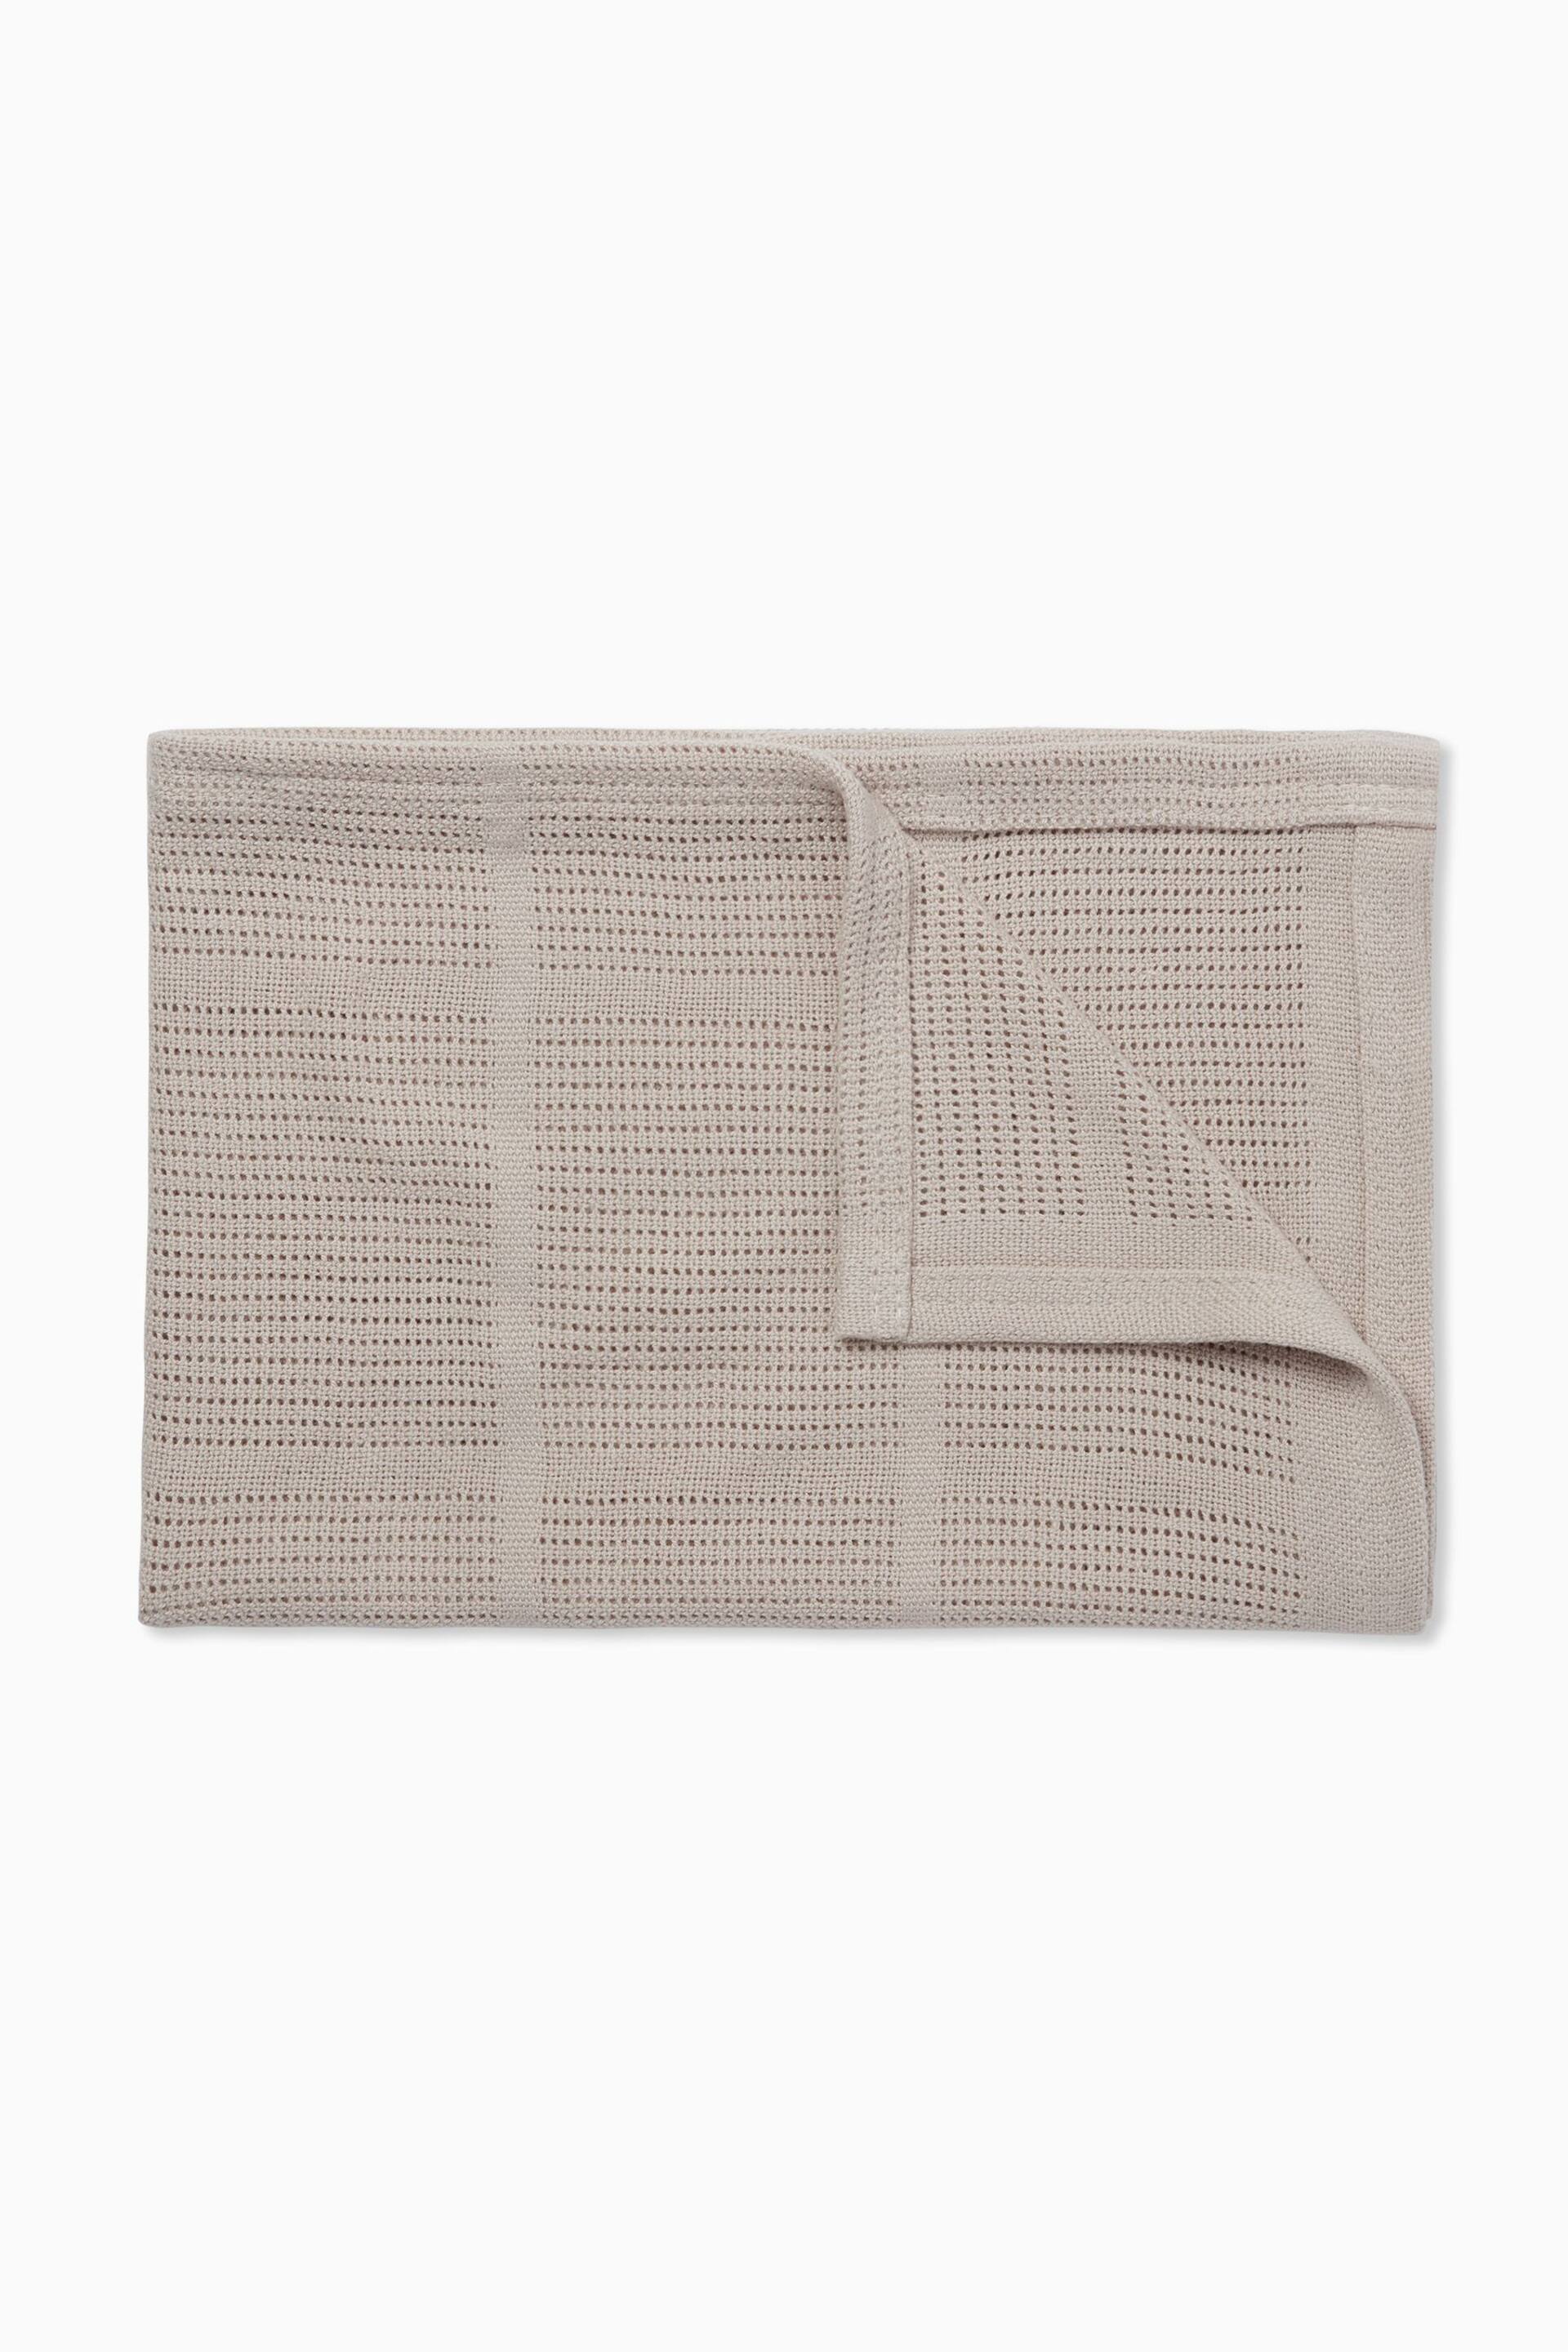 MORI Brown Soft Cotton & Bamboo Cellular Baby Blanket - Image 1 of 4